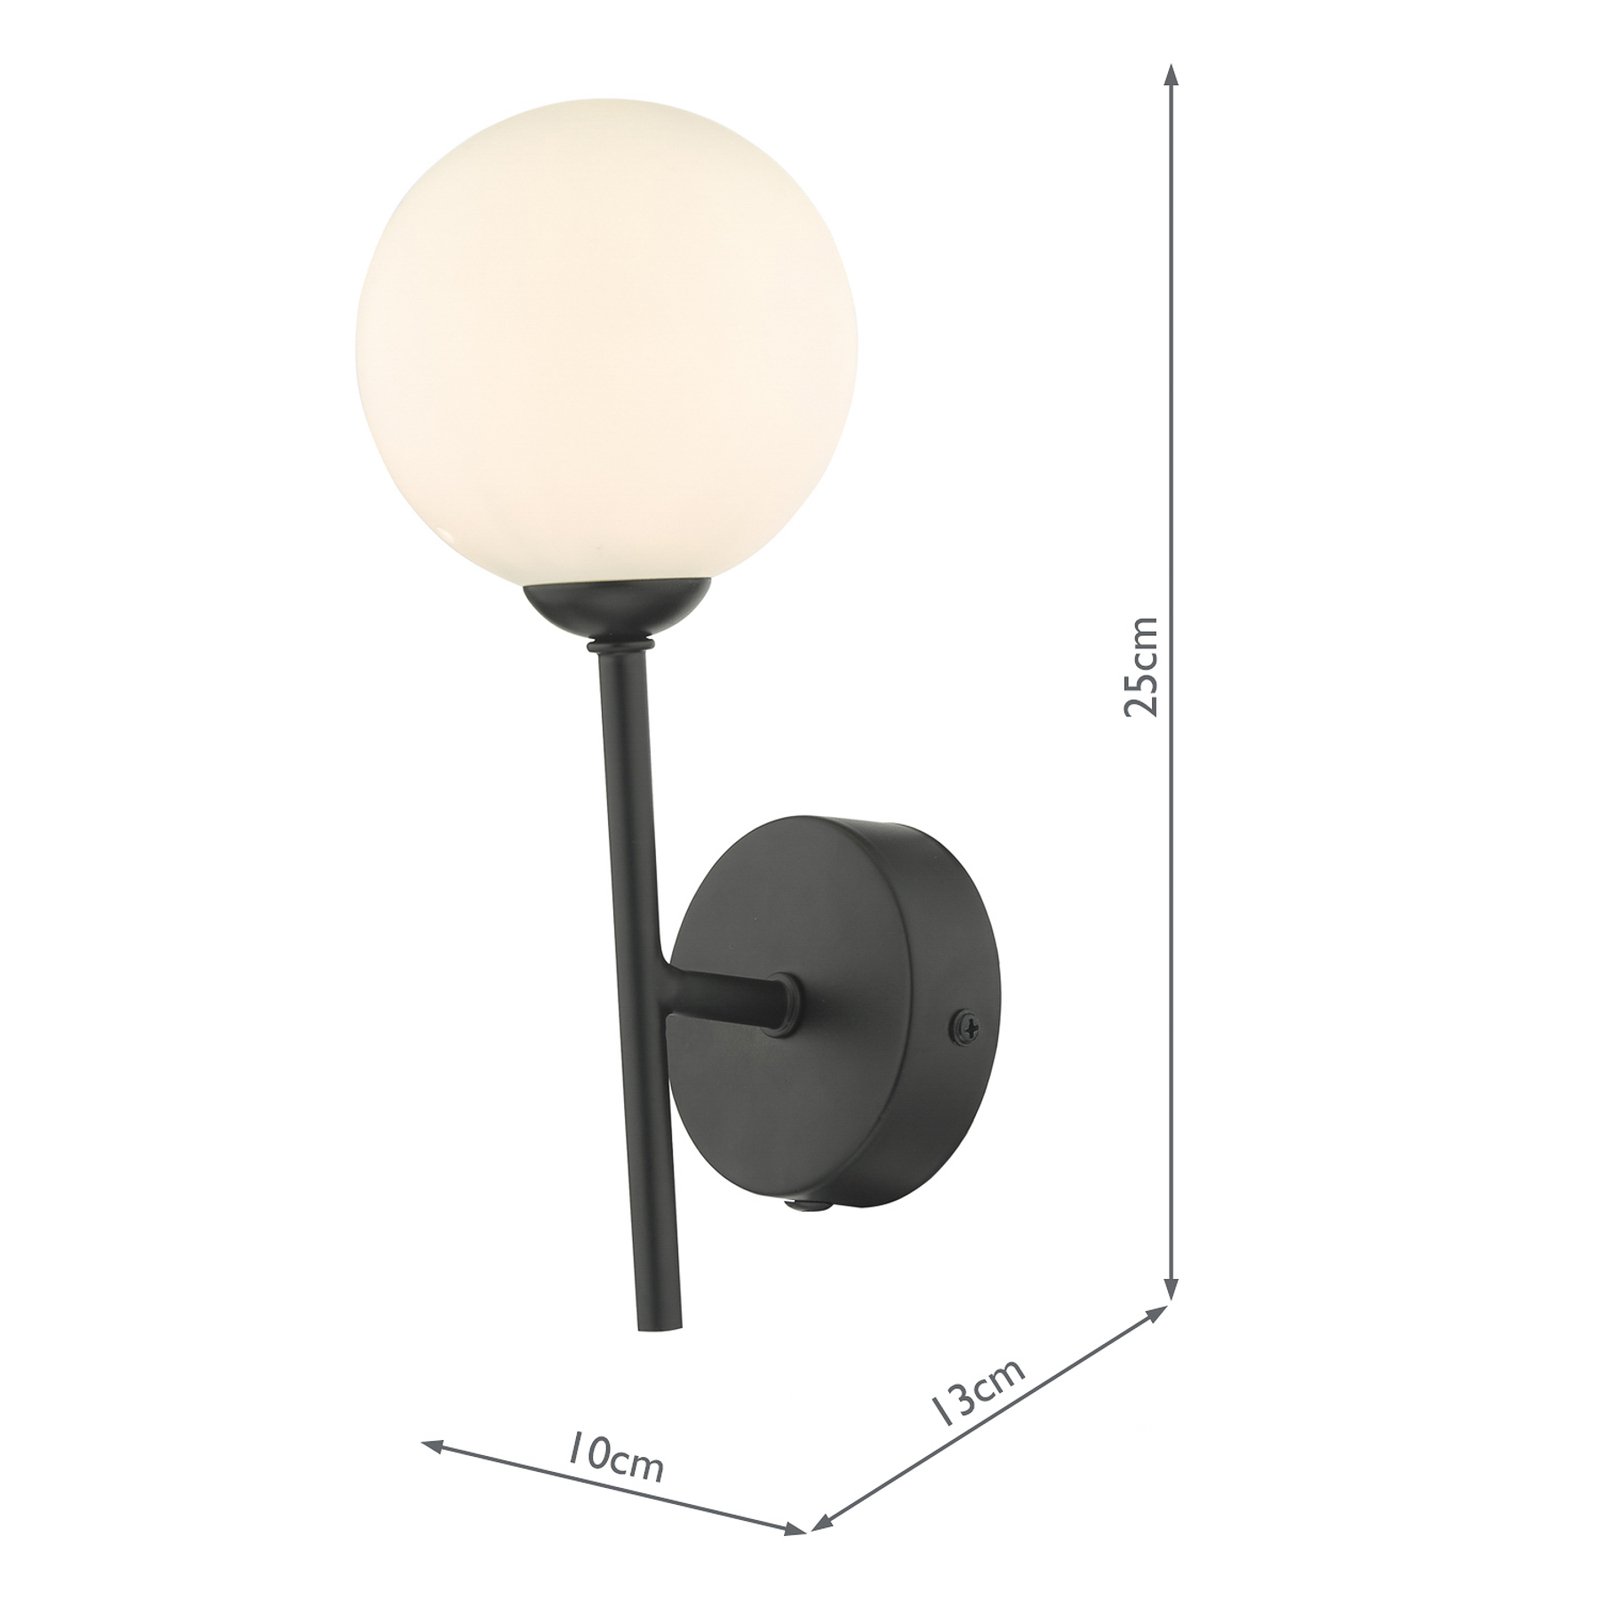 Cohen wall light with opal white glass globe